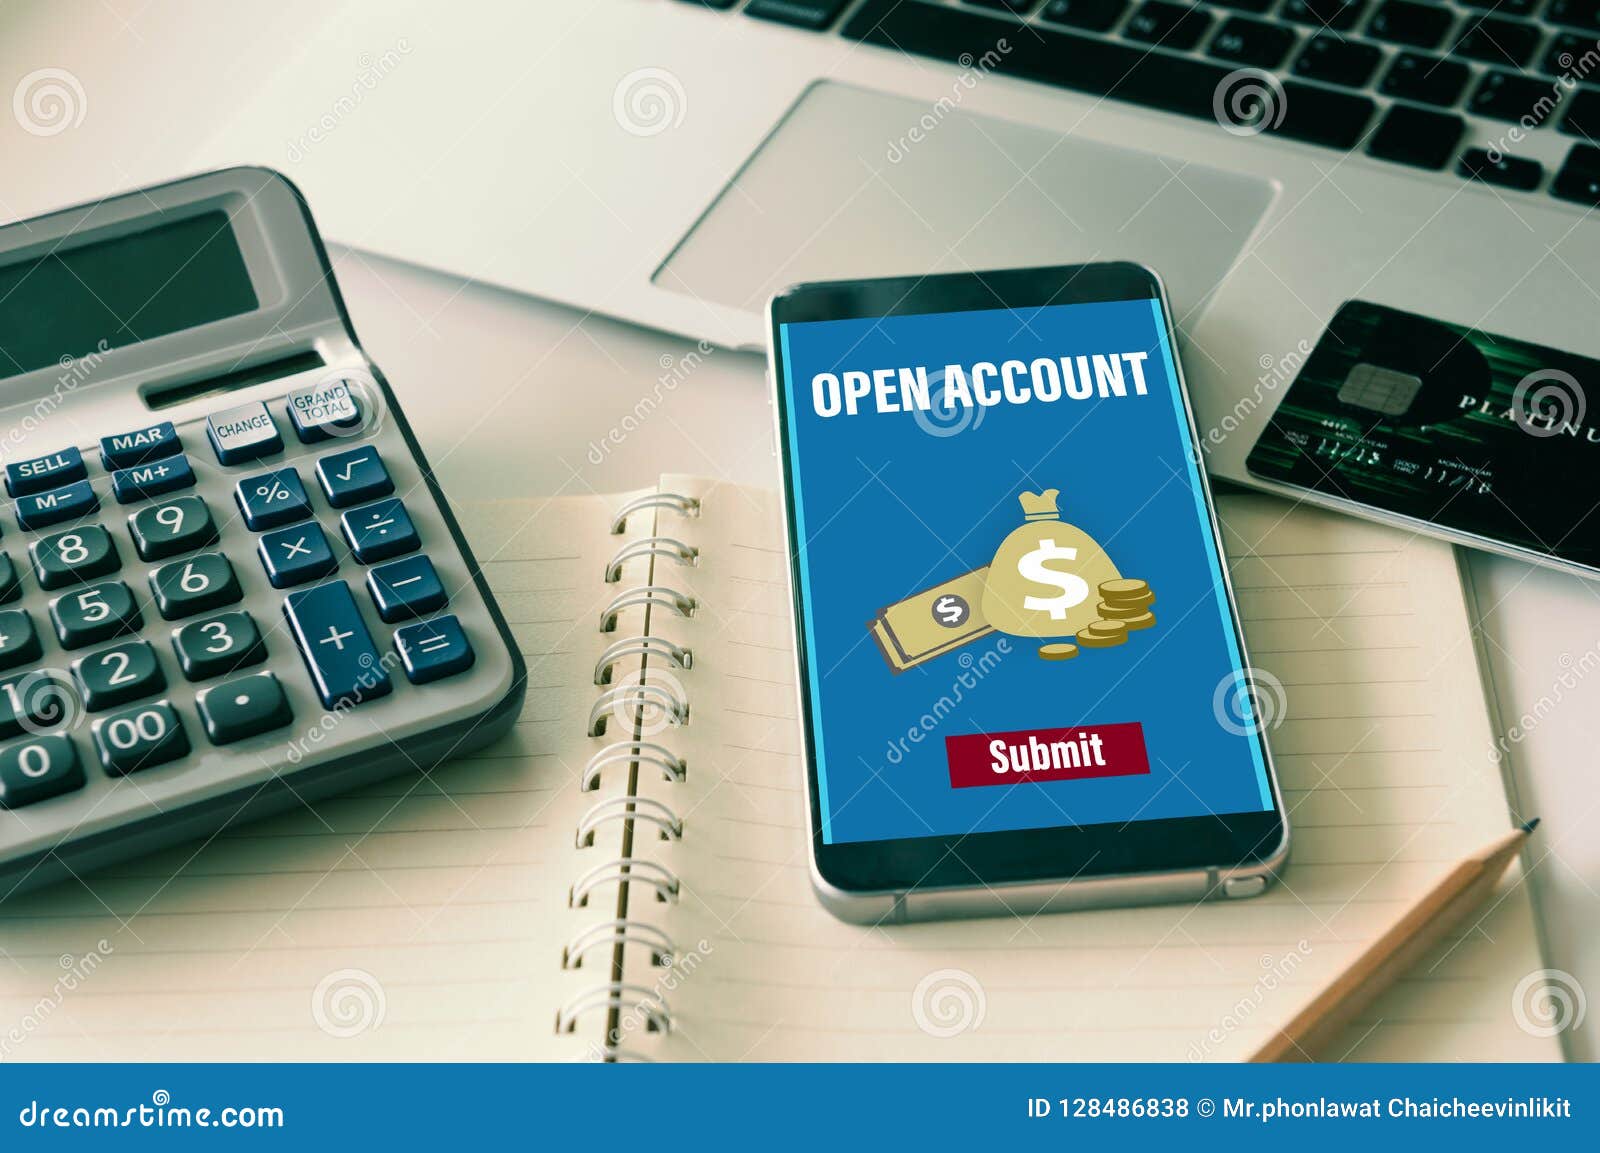 Open A Bank Account Online Stock Photo Image Of Account 128486838